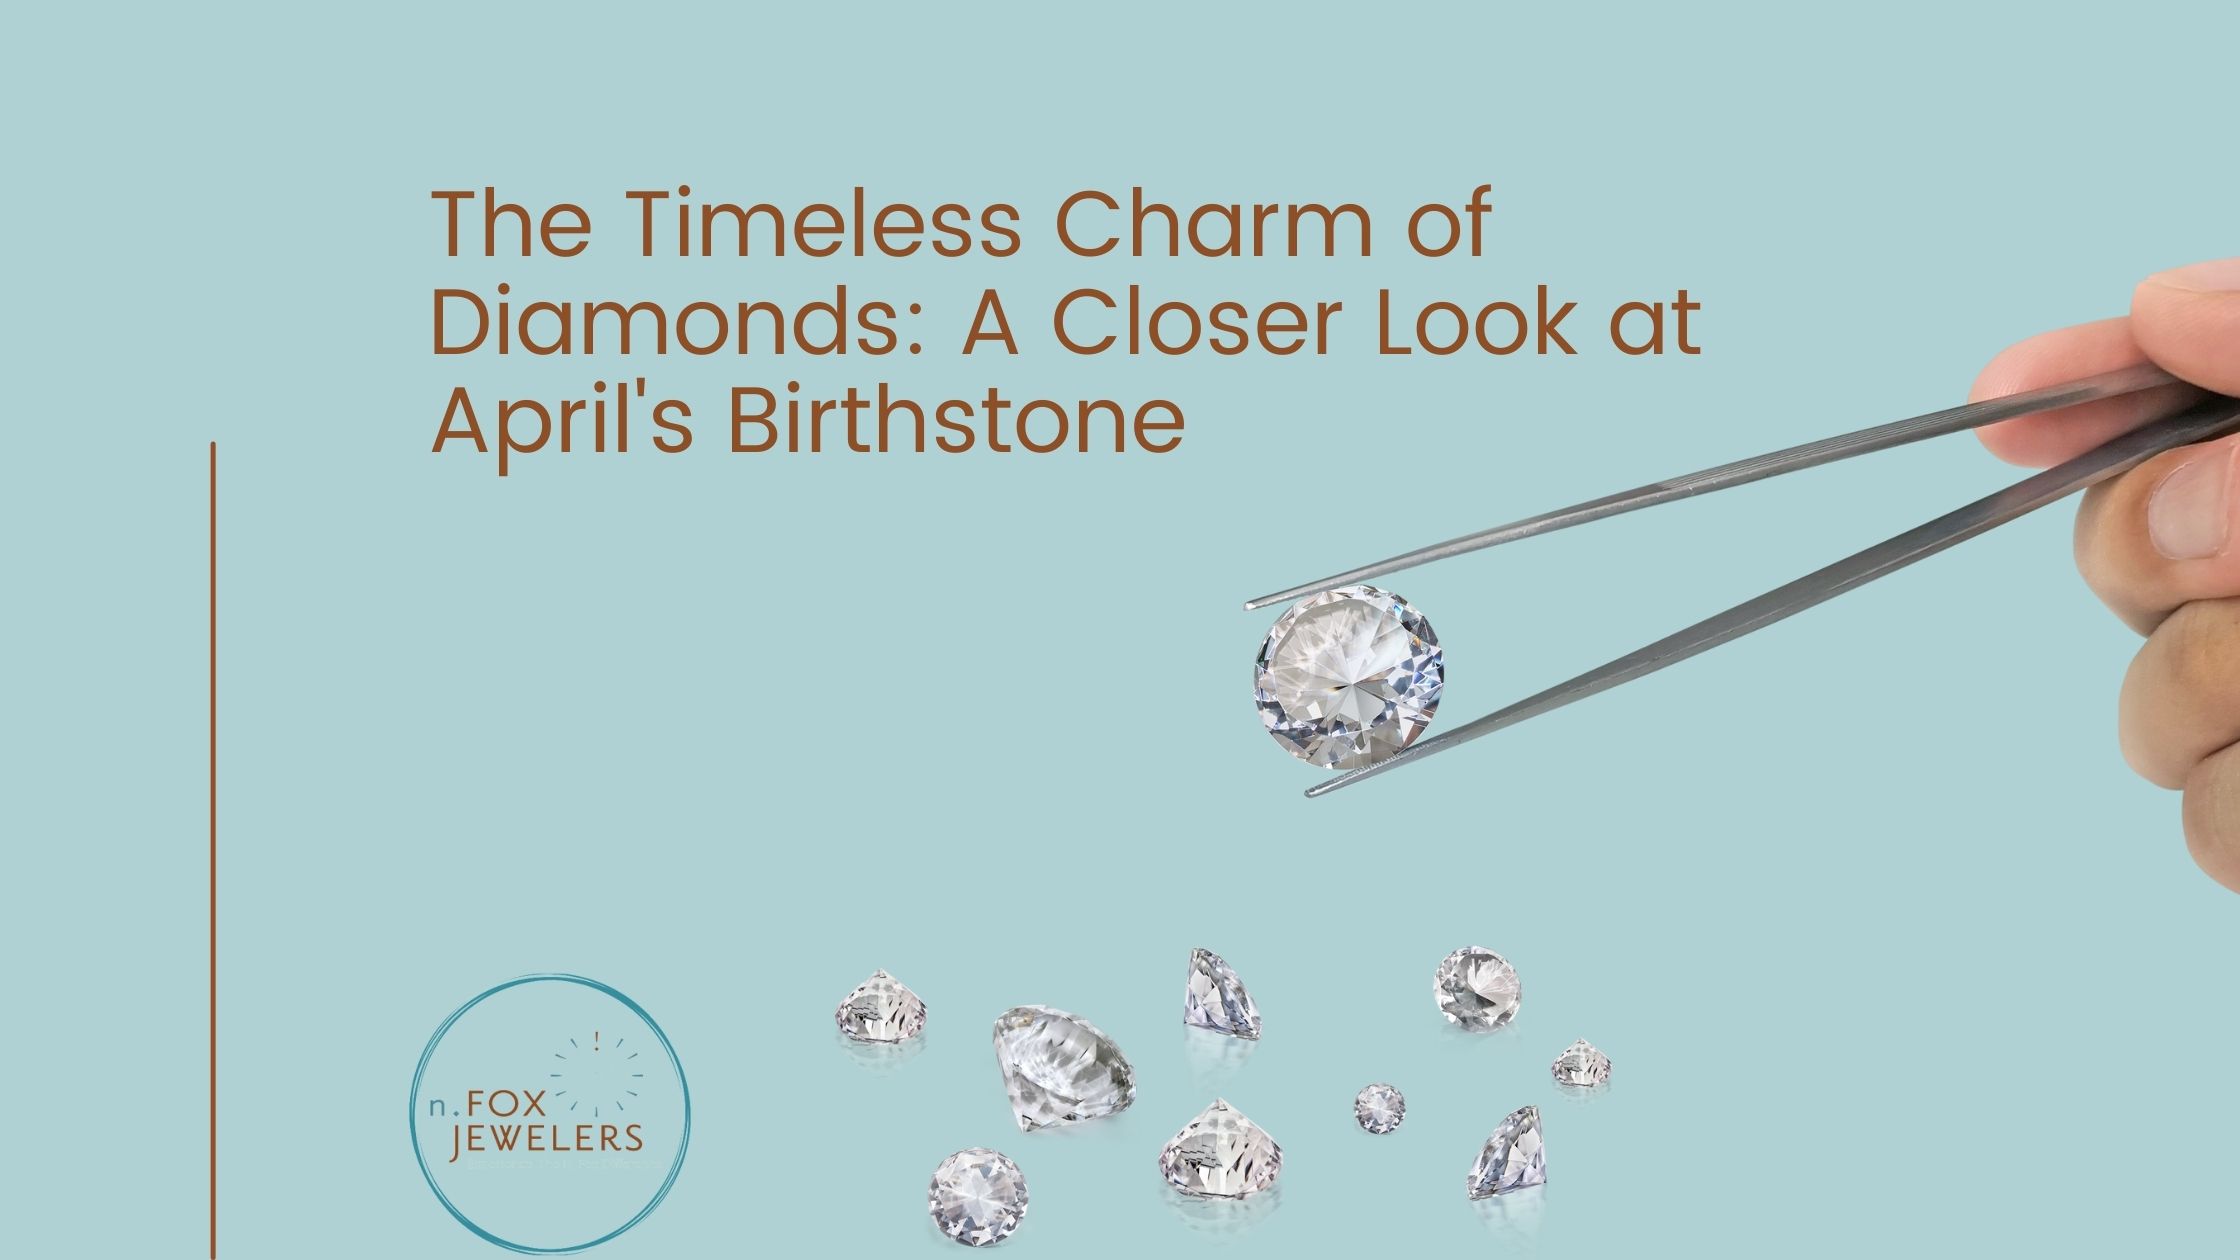 The Timeless Charm of Diamonds: A Closer Look at April's Birthstone